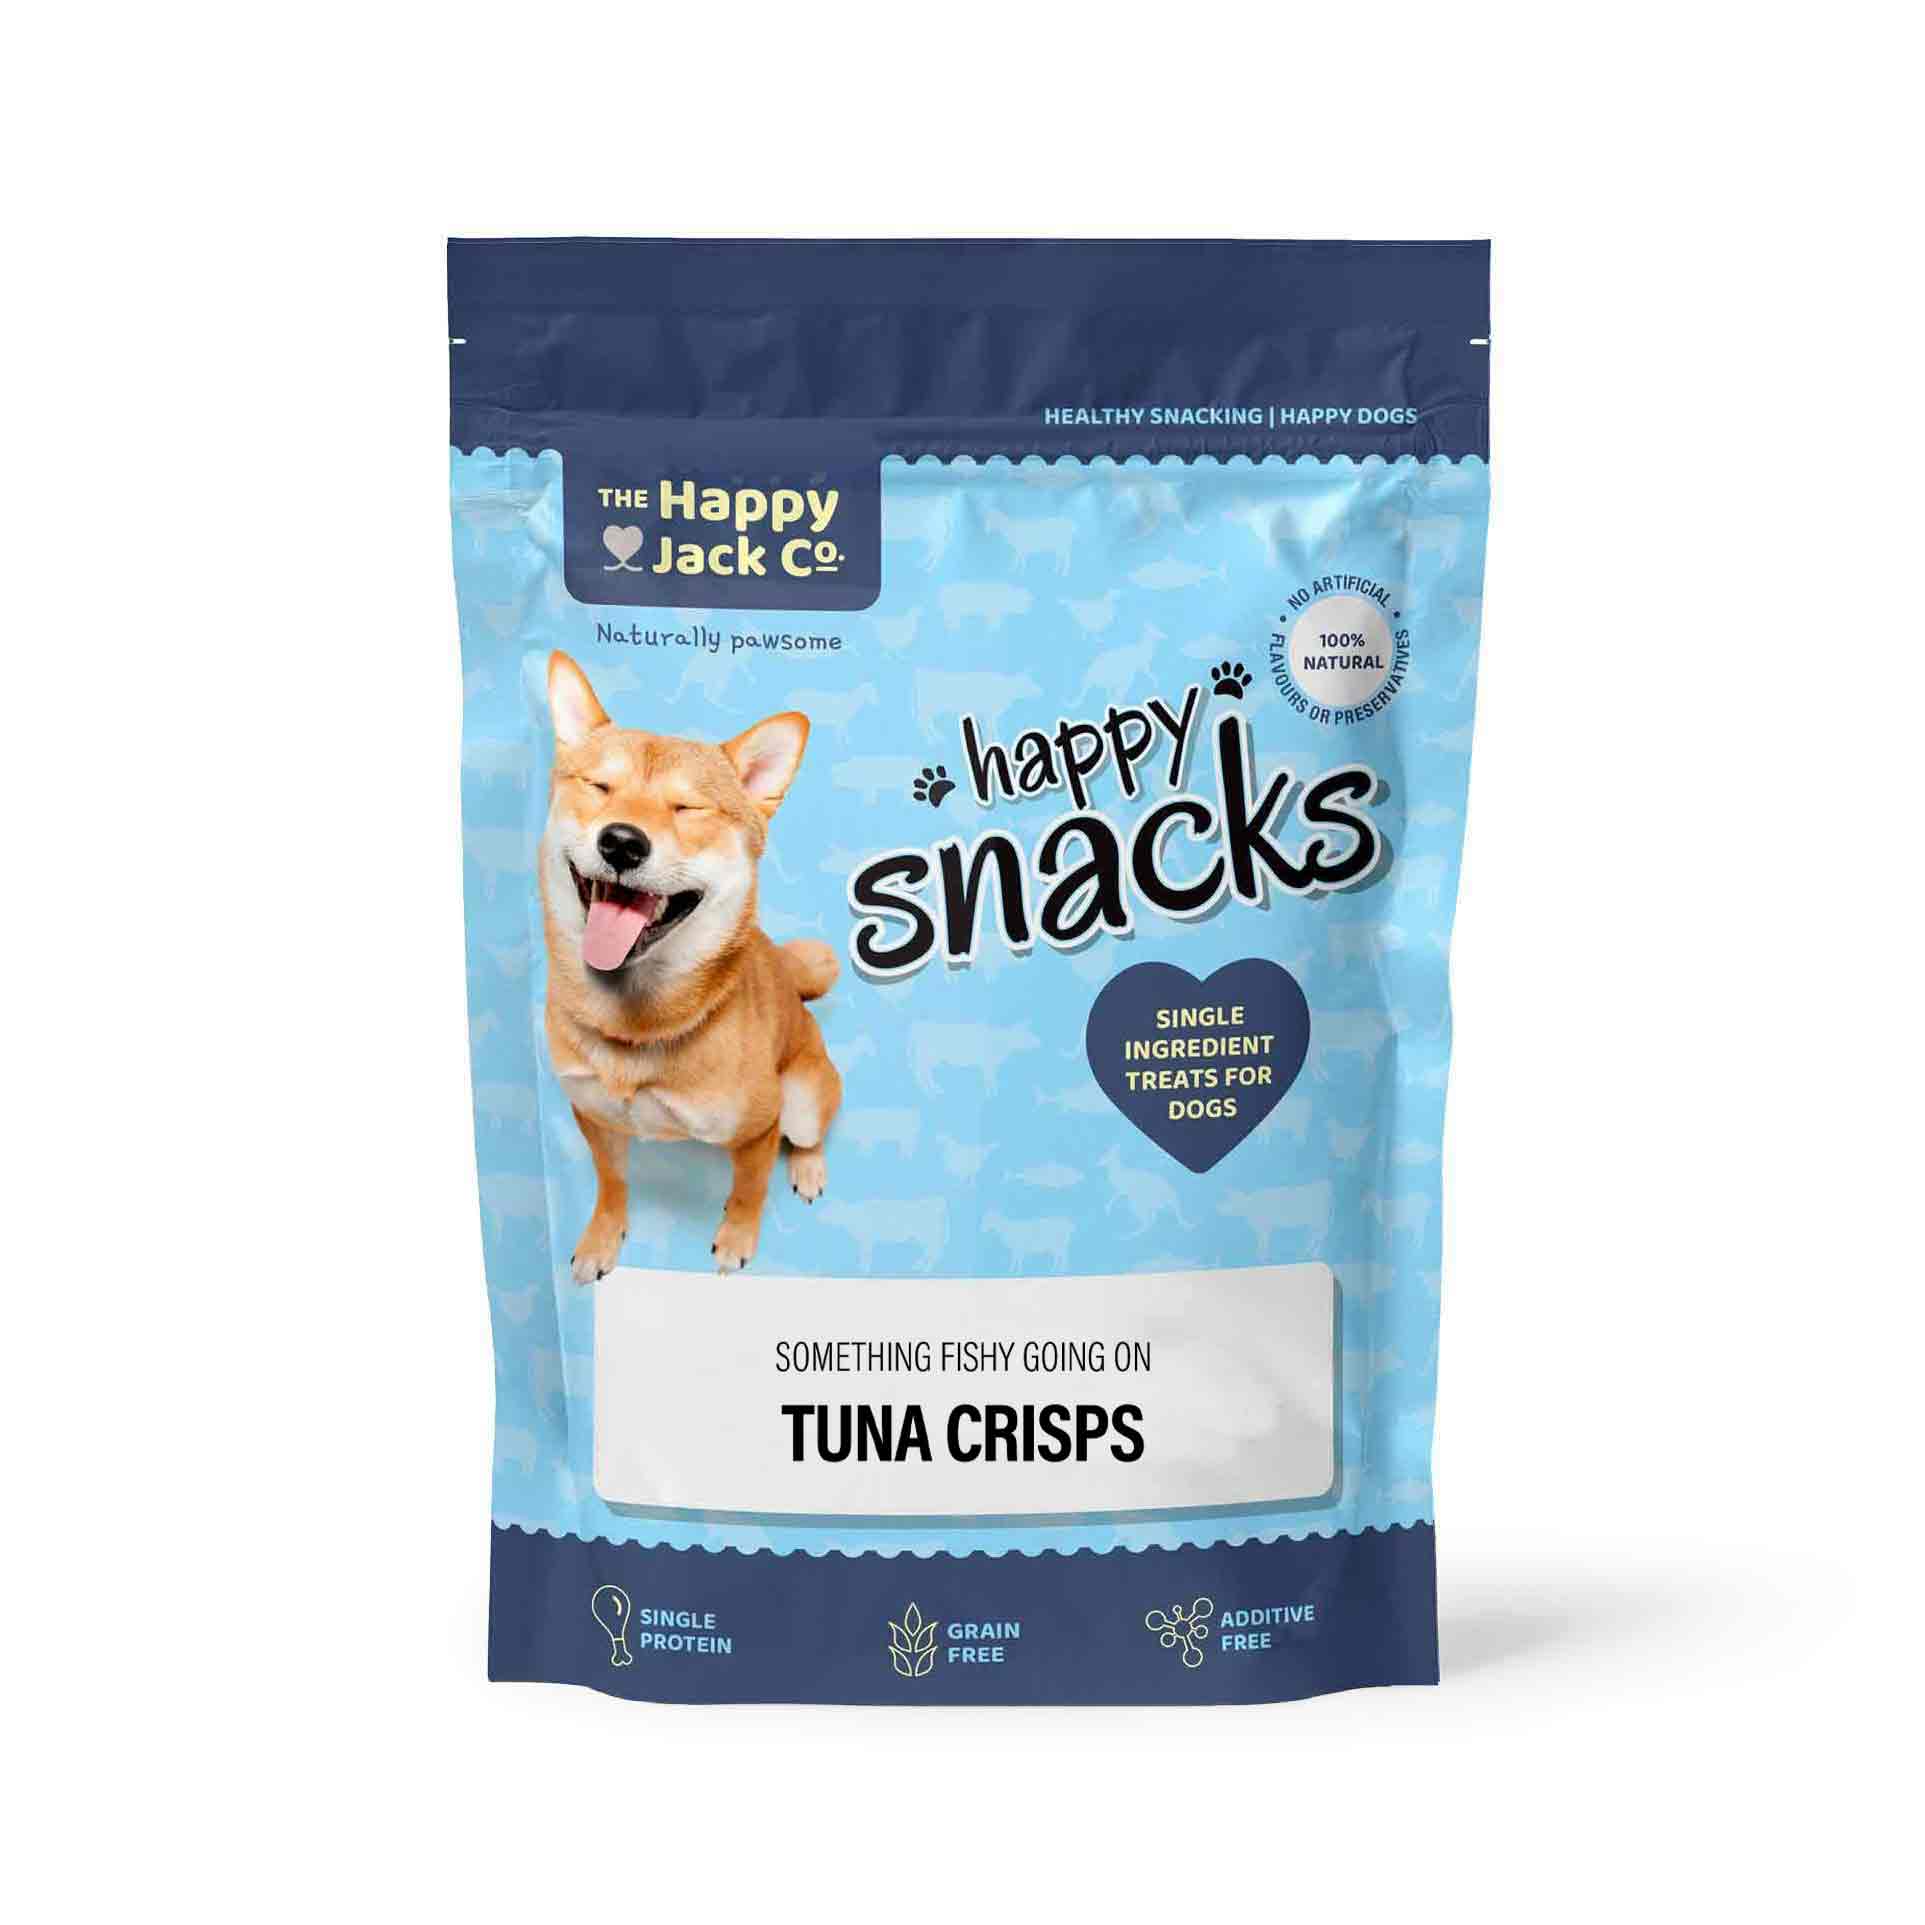 are crisps ok for dogs